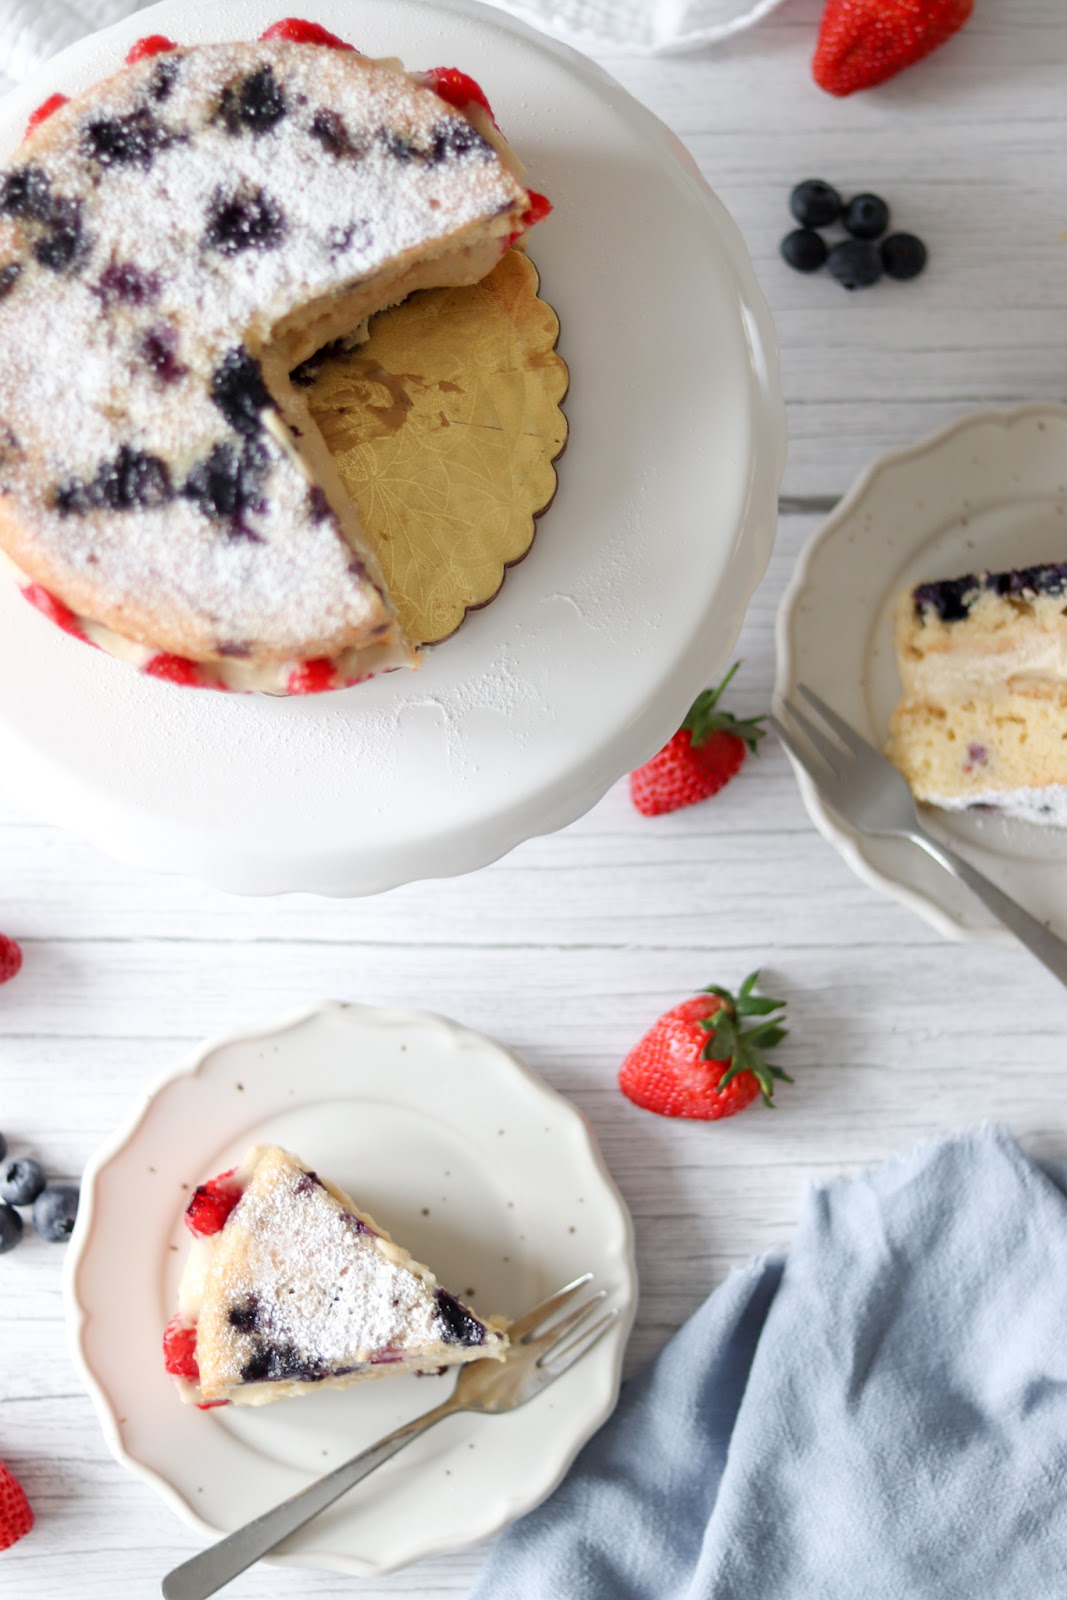 Strawberry and Blueberry Fraisier Cake – Cotswold Flour